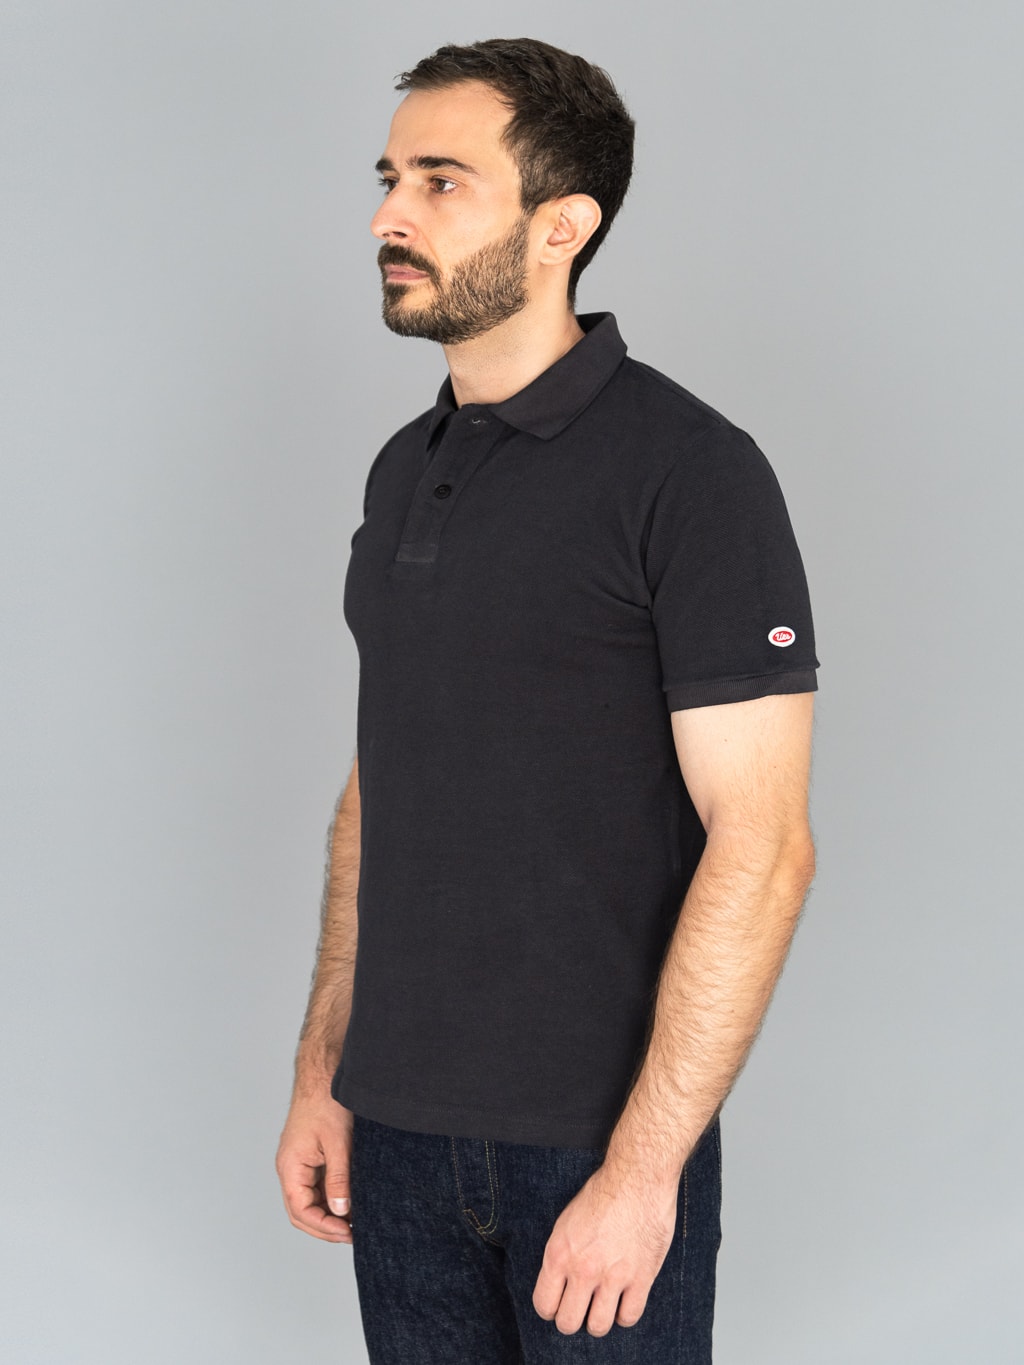 ues polo shirt black model side fit